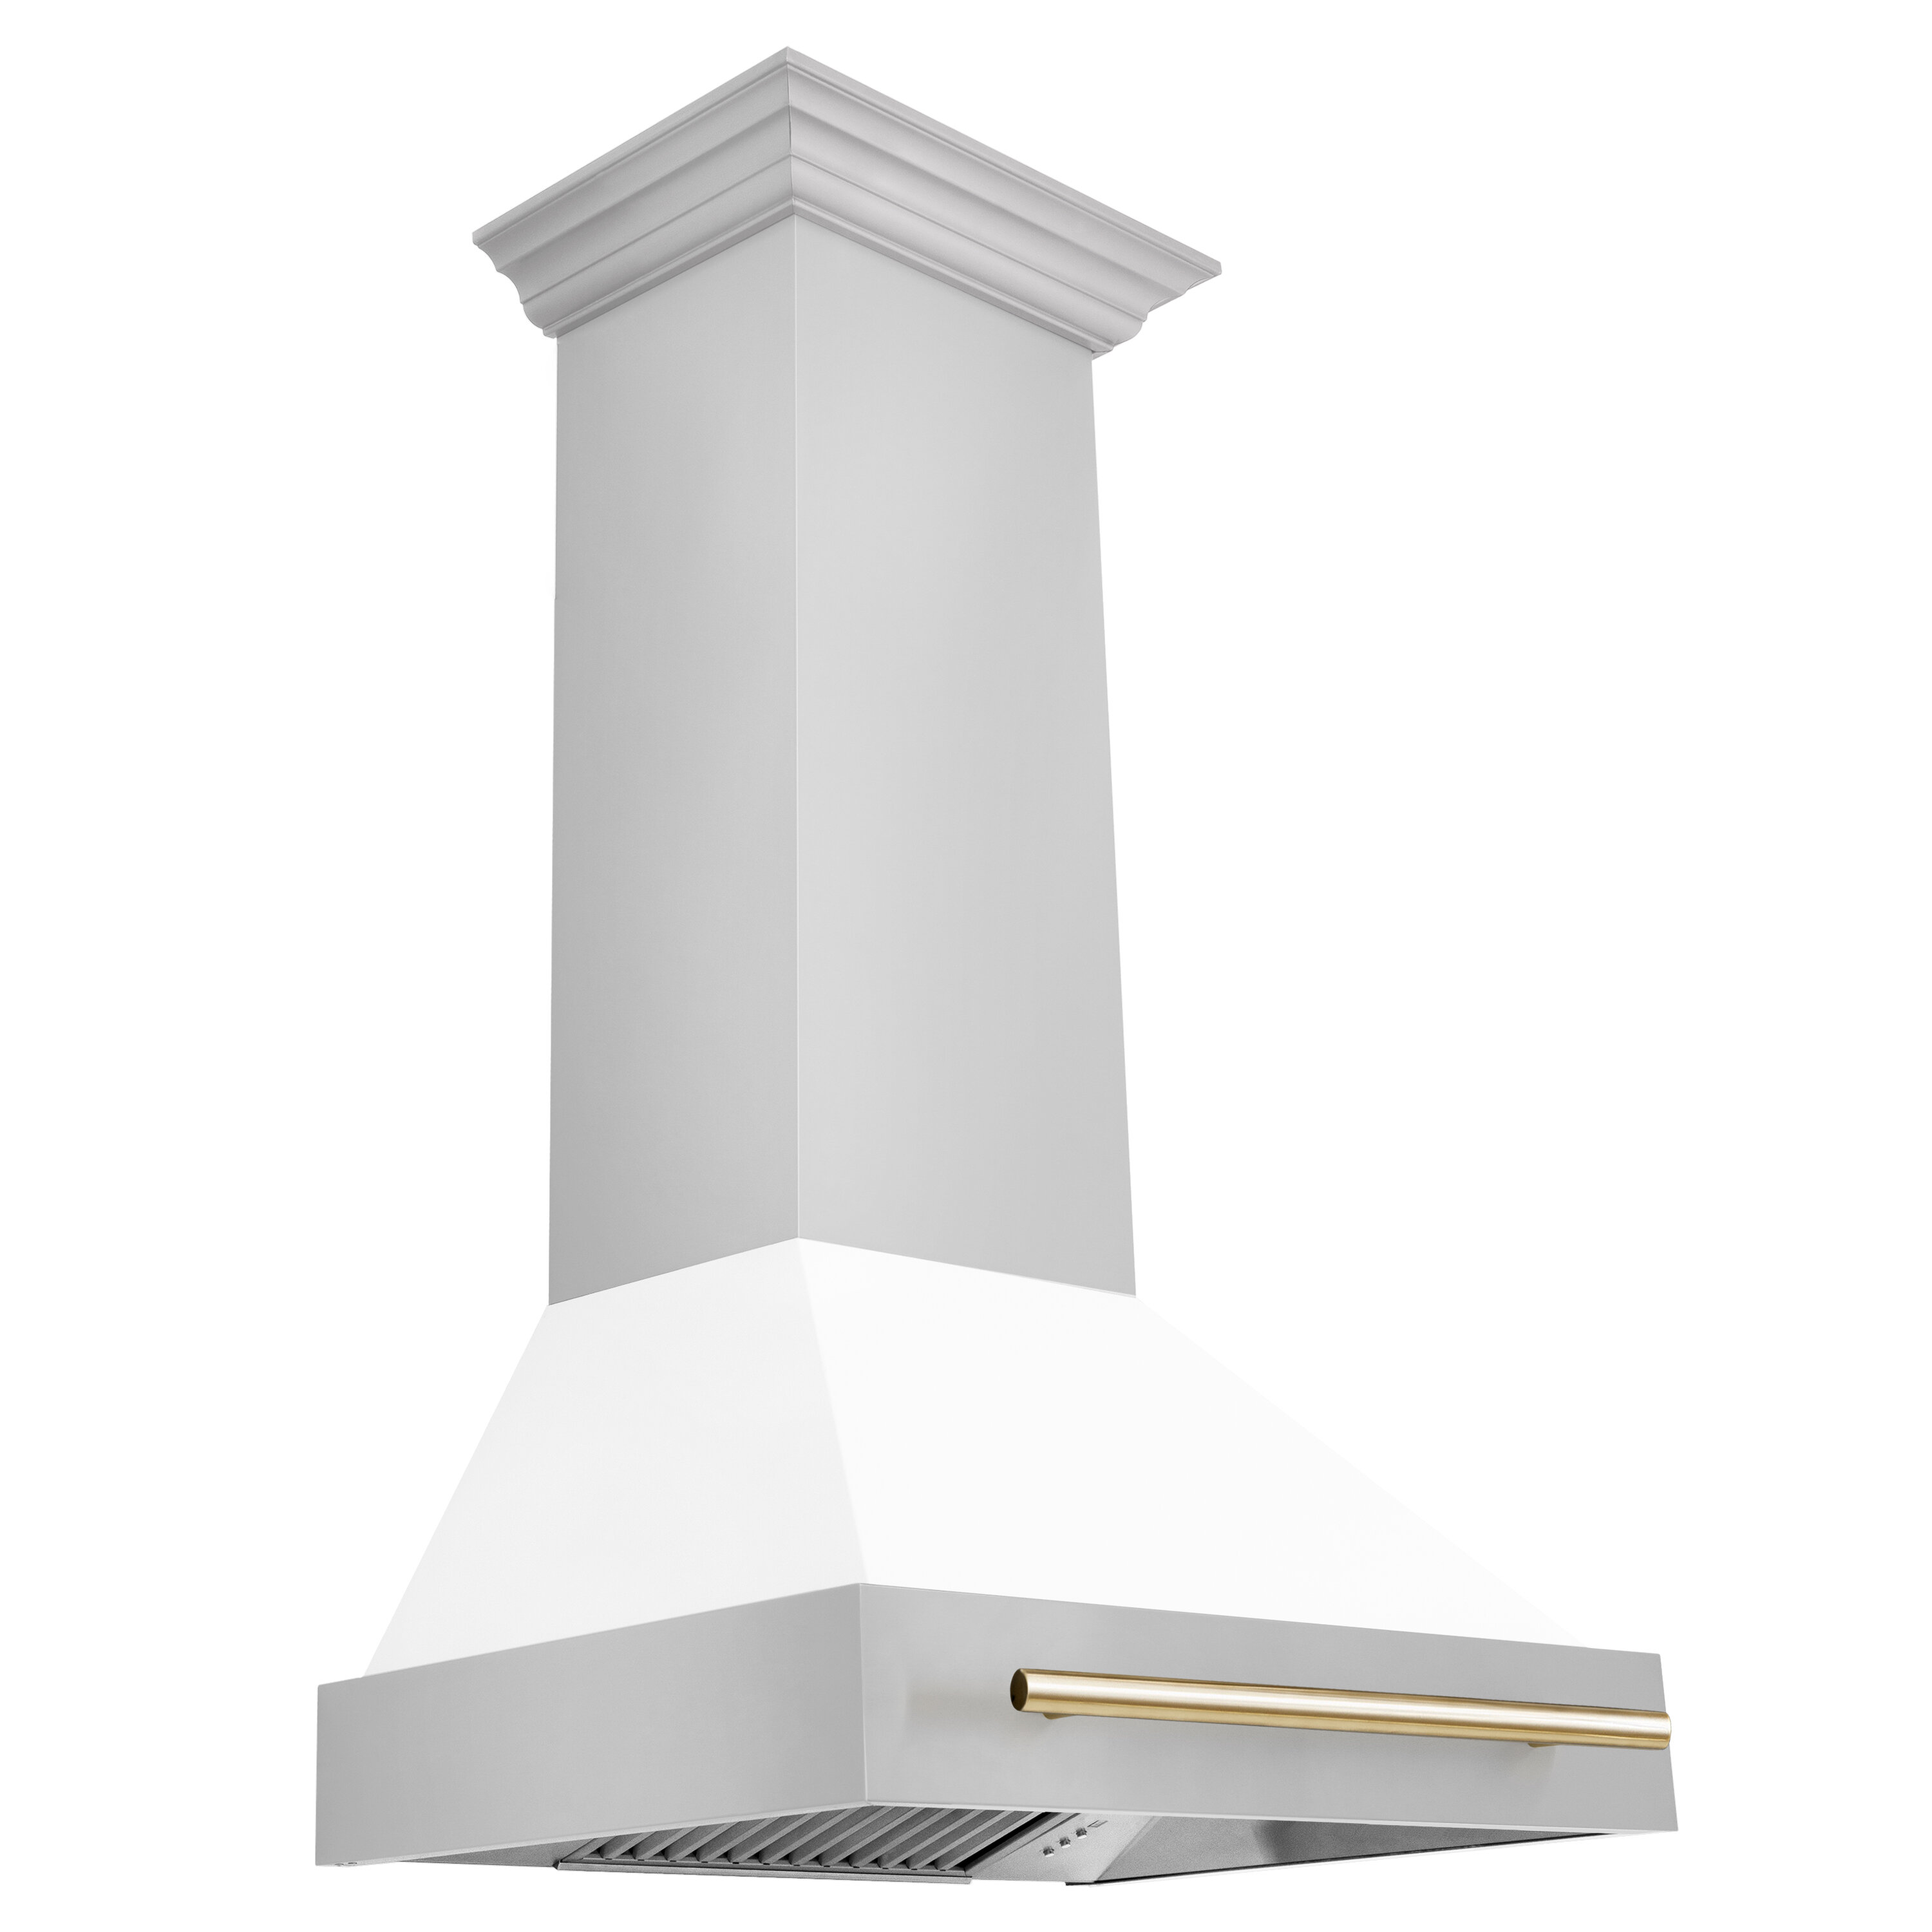 30" Autograph Edition 700 CFM Ducted Wall Mount Range Hood